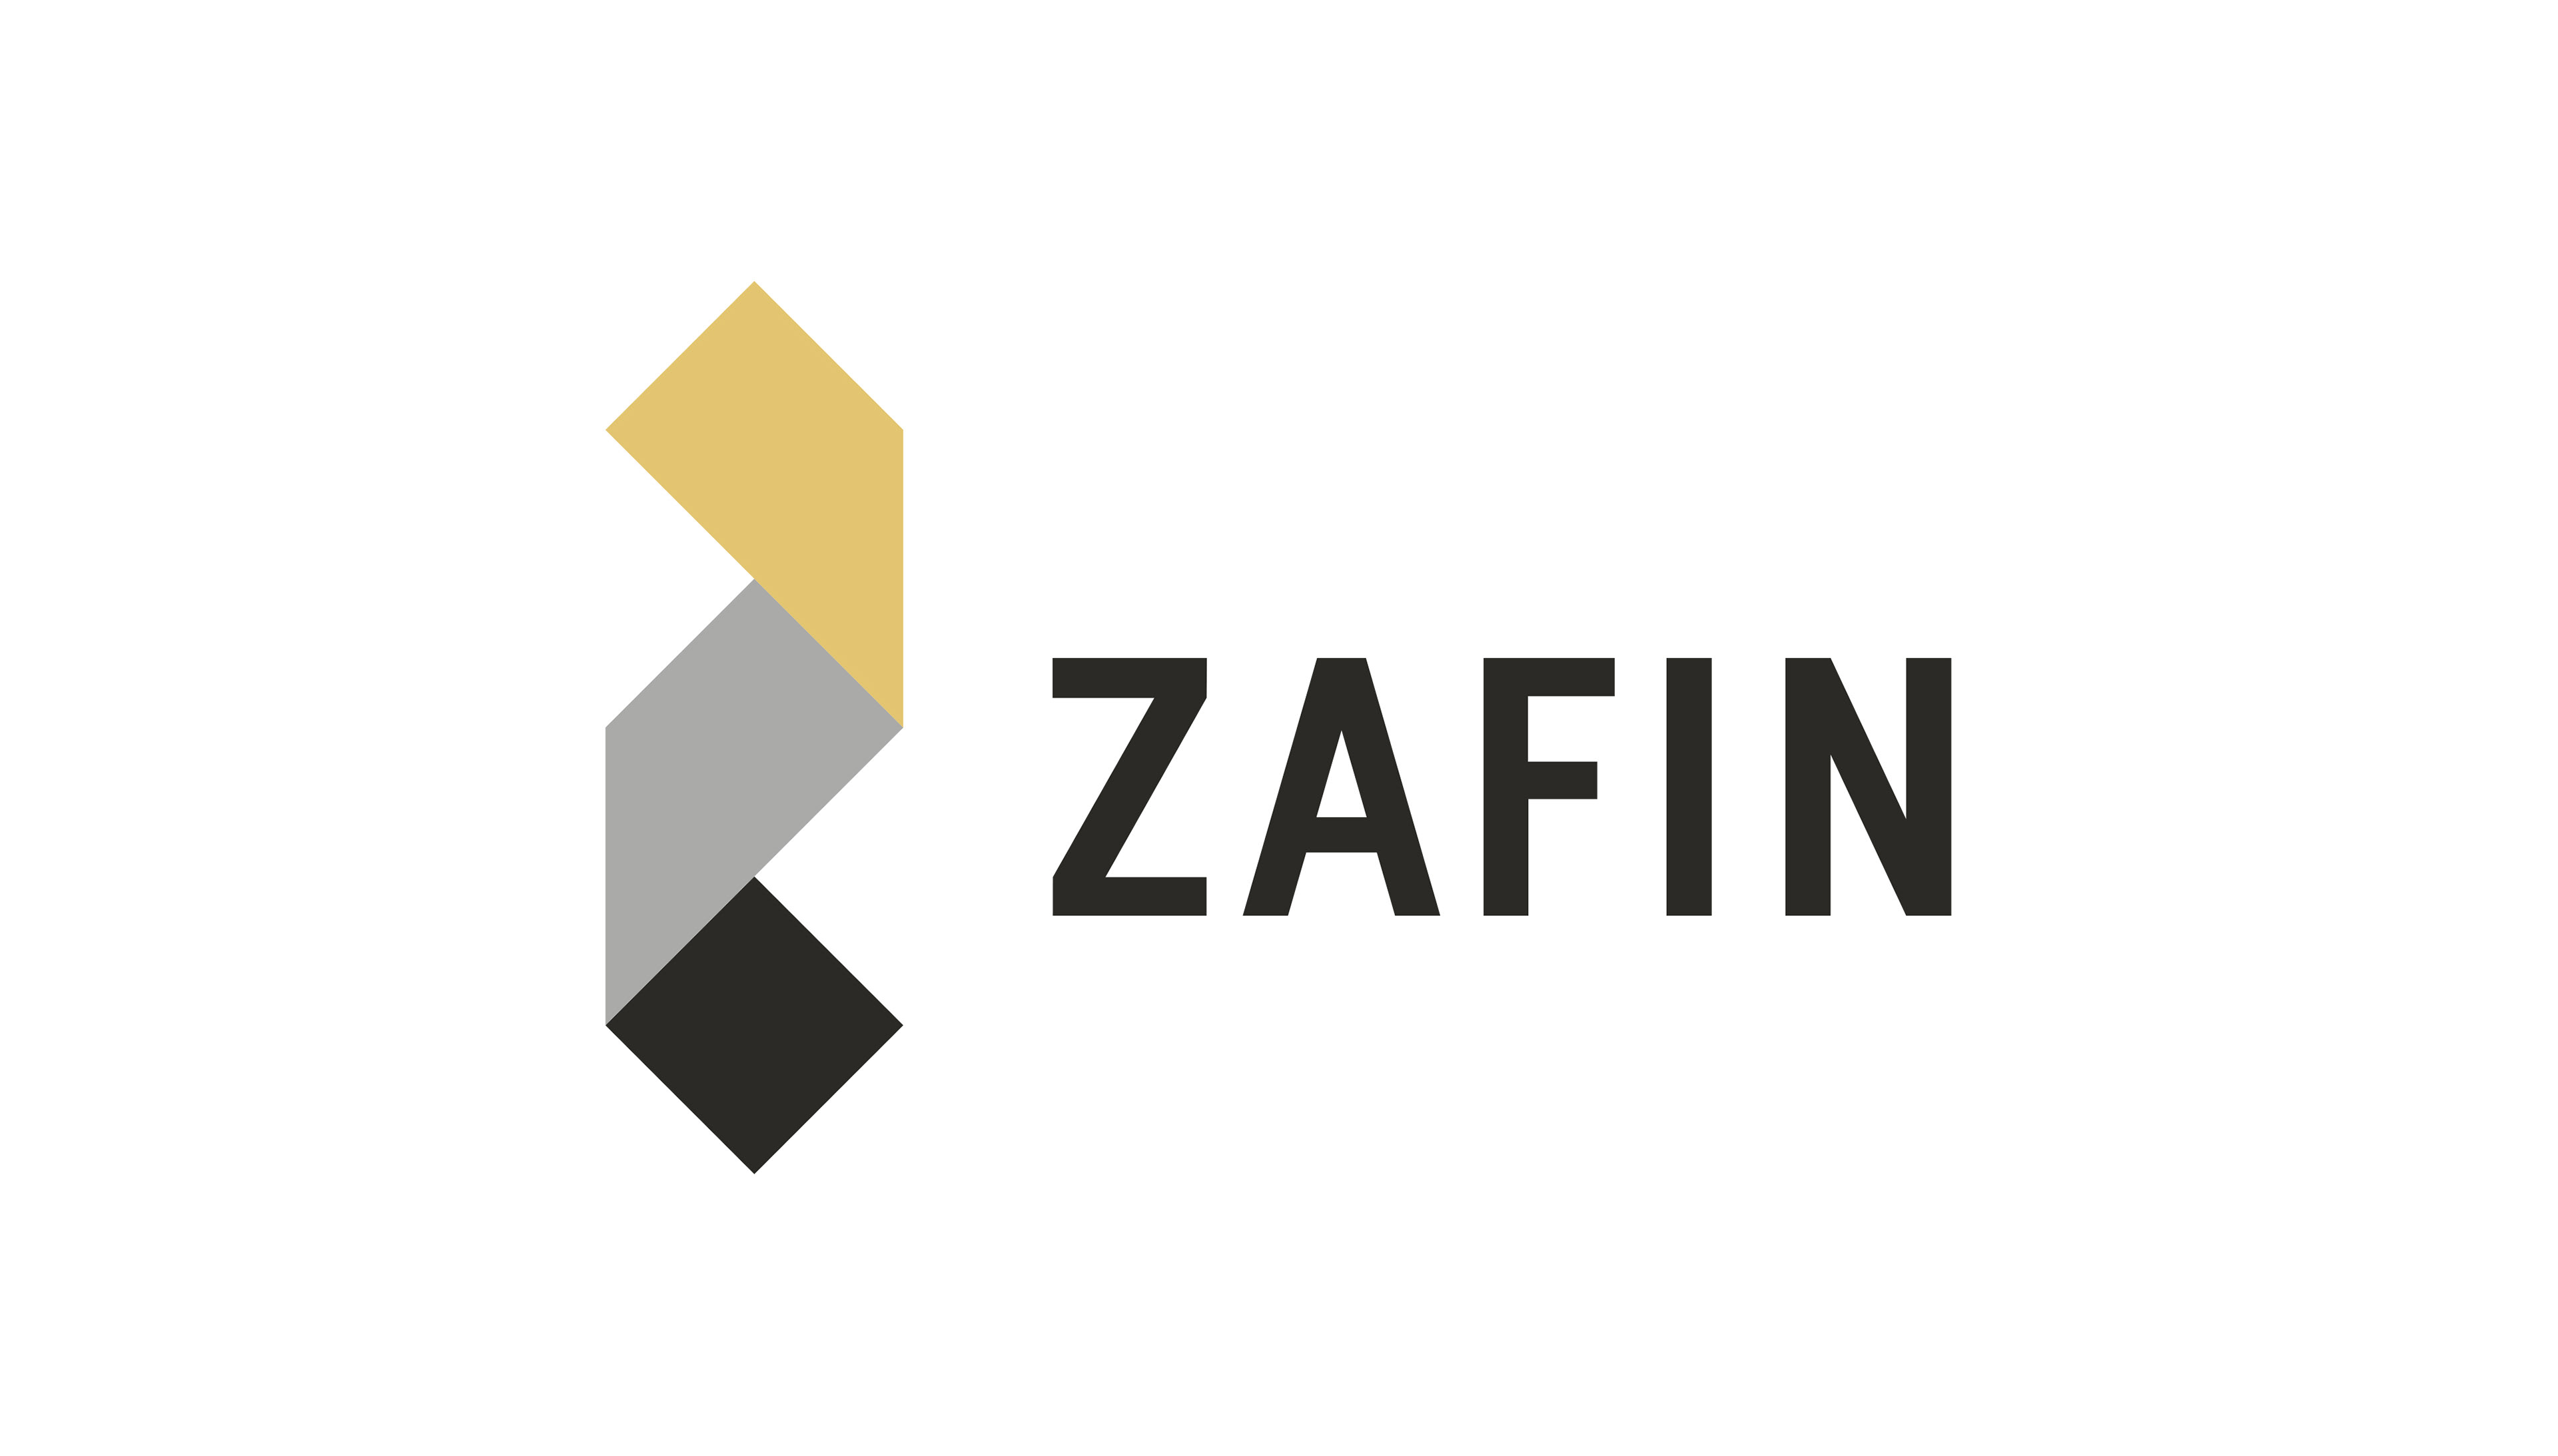 Global Fintech Leader Zafin Names Industry Veteran Dave Revell as Chair of the Board of Directors